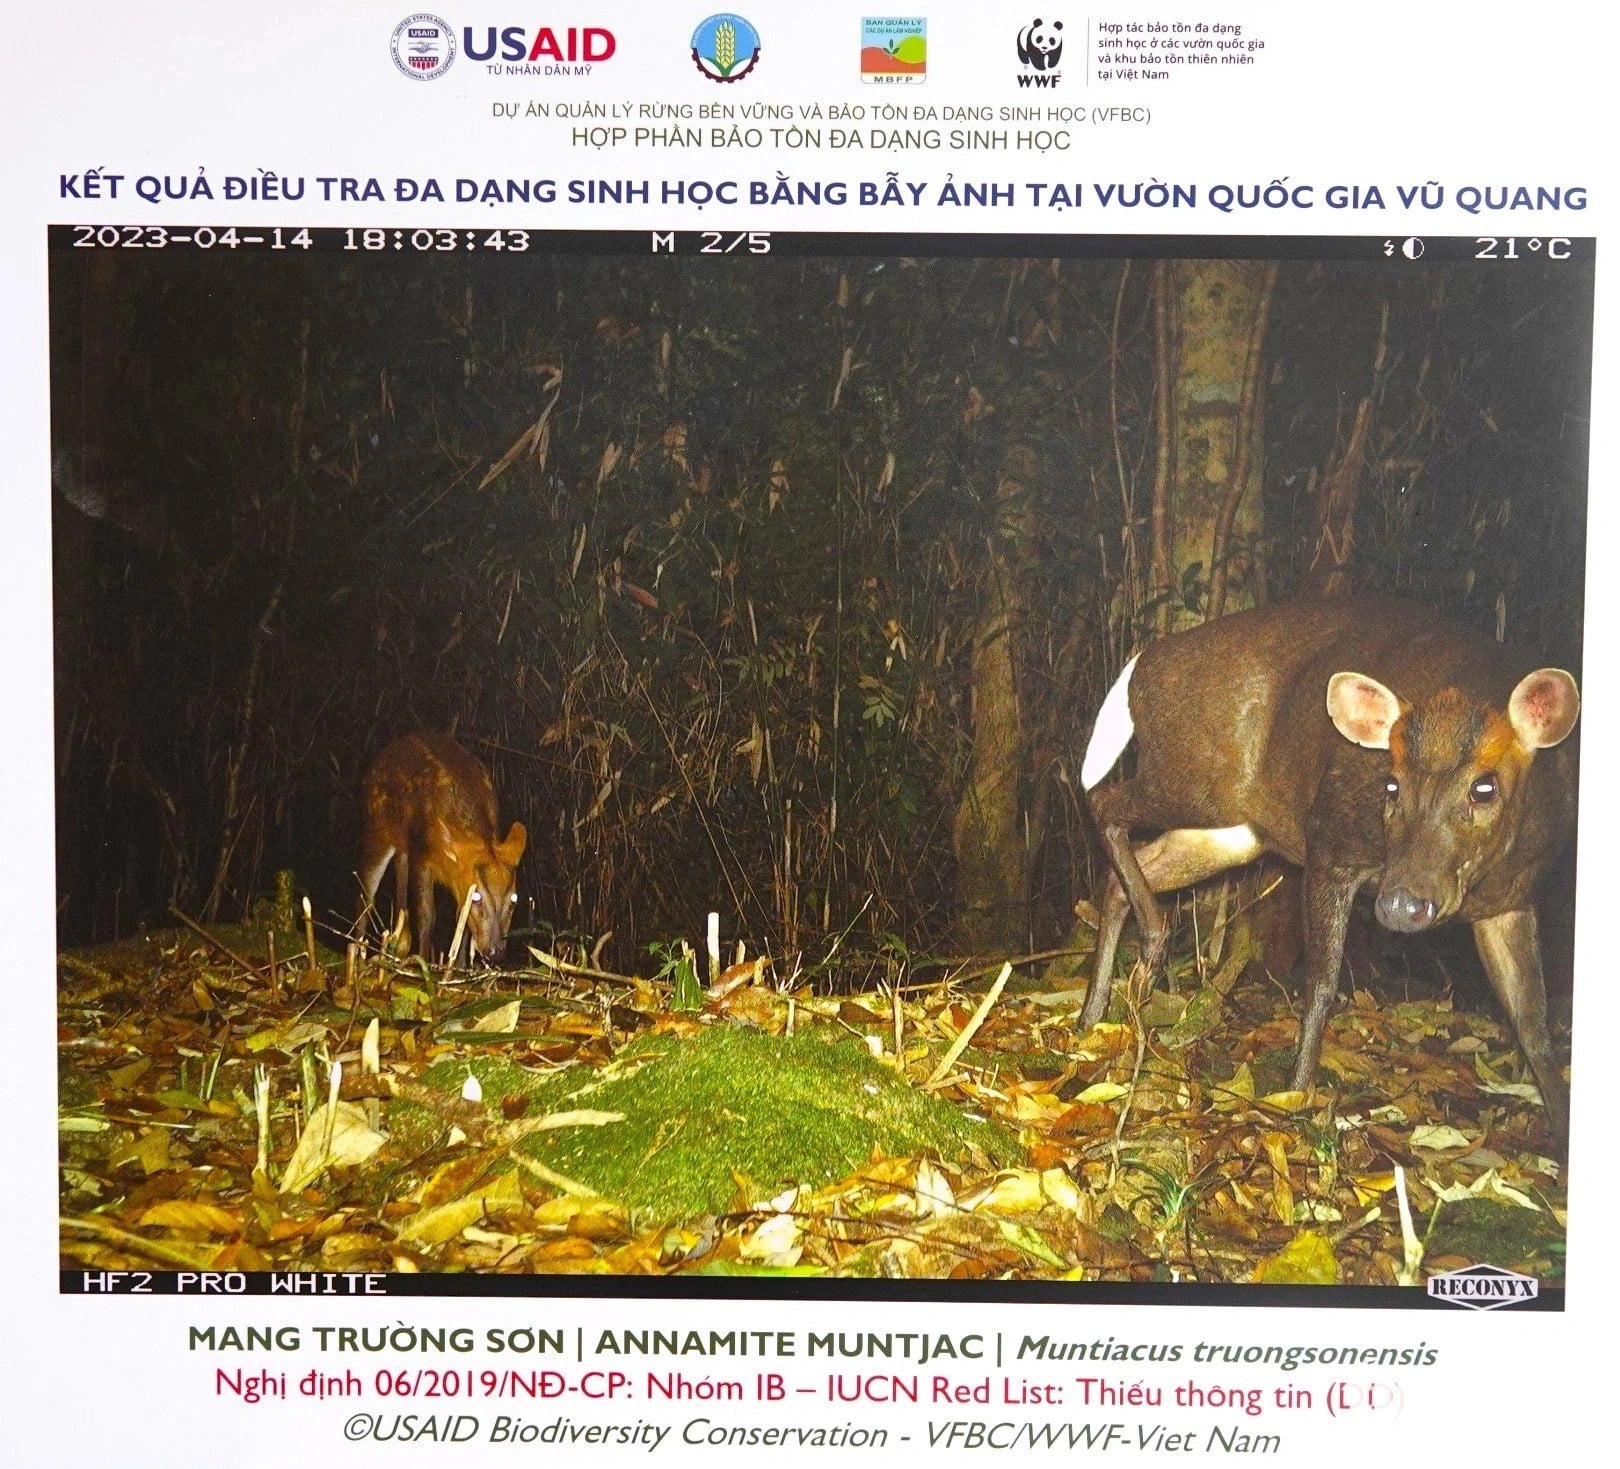 A Mang Truong Son (muntiacus truongsonensis) is photographed by a camera trap for a presentation at the event commemorating International Day for Biodiversity 2024, which took place on May 22, 2024 at the Vu Quang National Day in Ha Tinh Province. Photo: Le Minh / Tuoi Tre